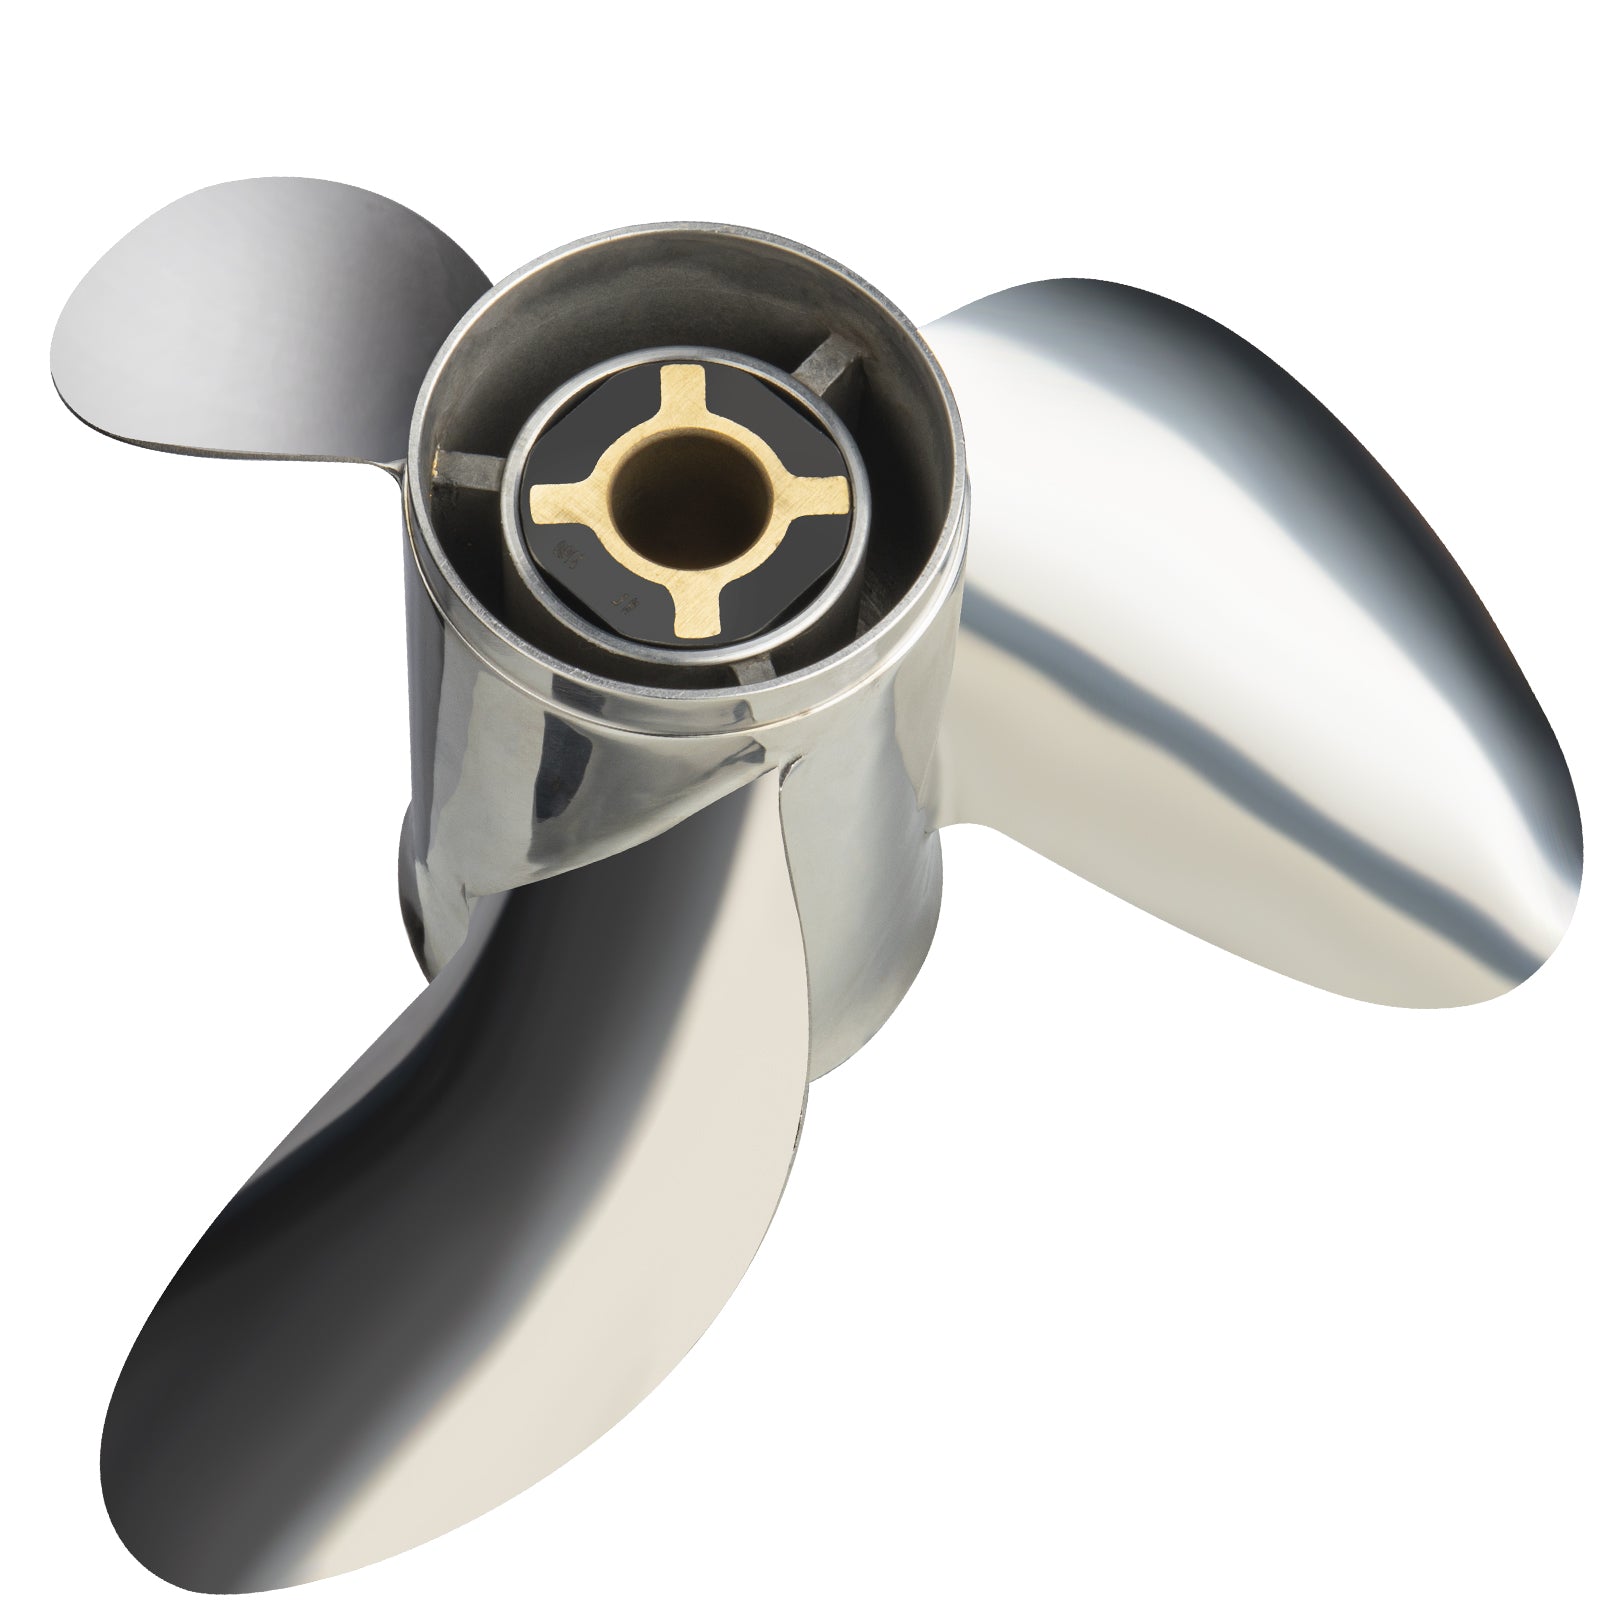 13 1/2 x 20 Stainless Steel Propeller for Yamaha Outboard 70-100 HP ,15 Spline Tooth,RH